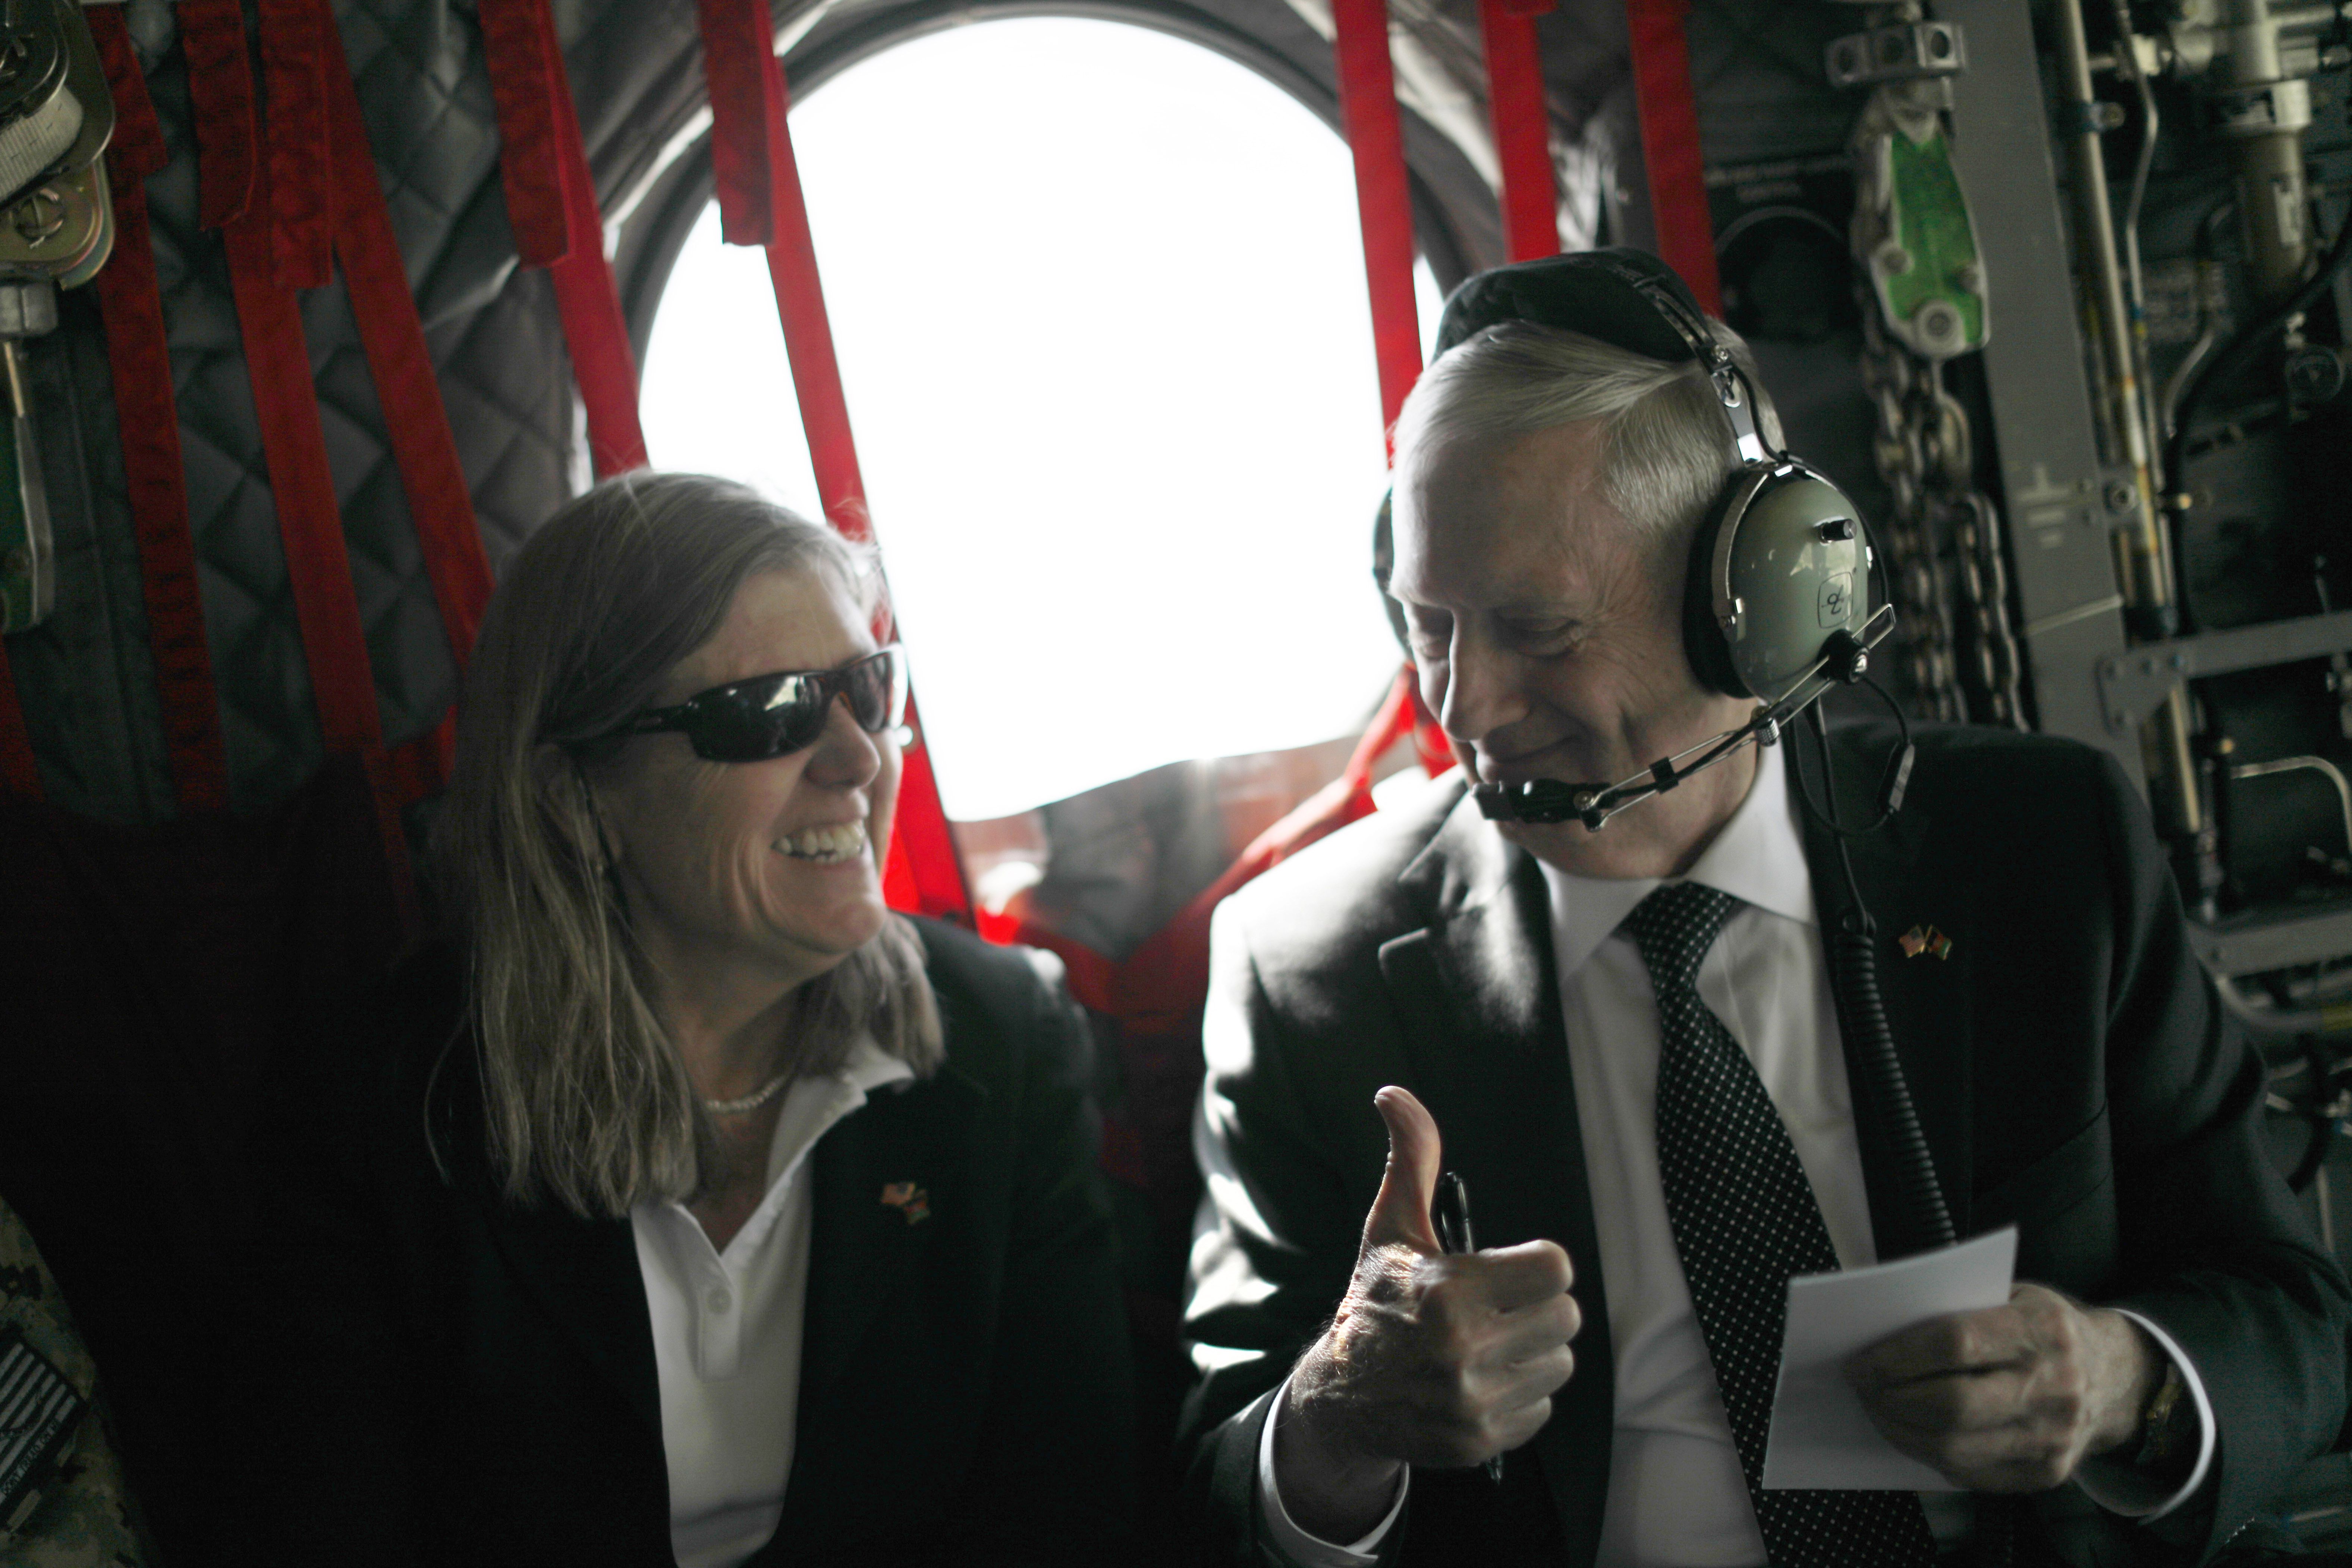 US Defence Secretary James Mattis (R) gestures to senior advisor Sally Donnelly as they arrive by helicopter at Resolute Support headquarters in the Afghan capital Kabul on April 24, 2017.